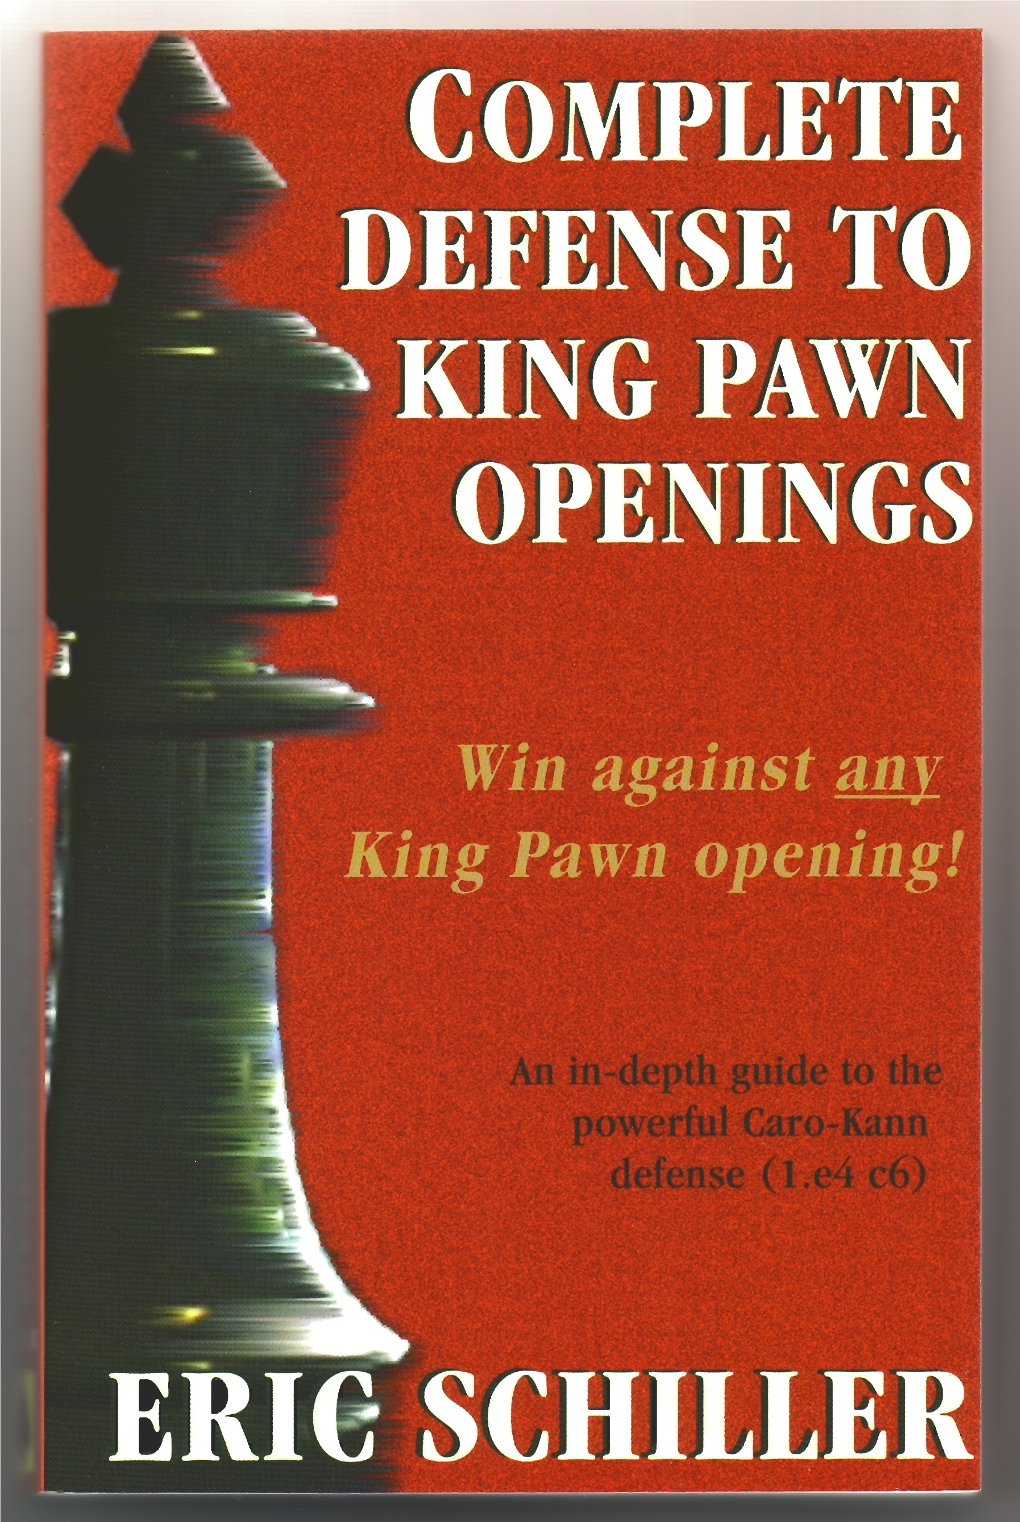 Complete Defense to King Pawn Openings Excerpts